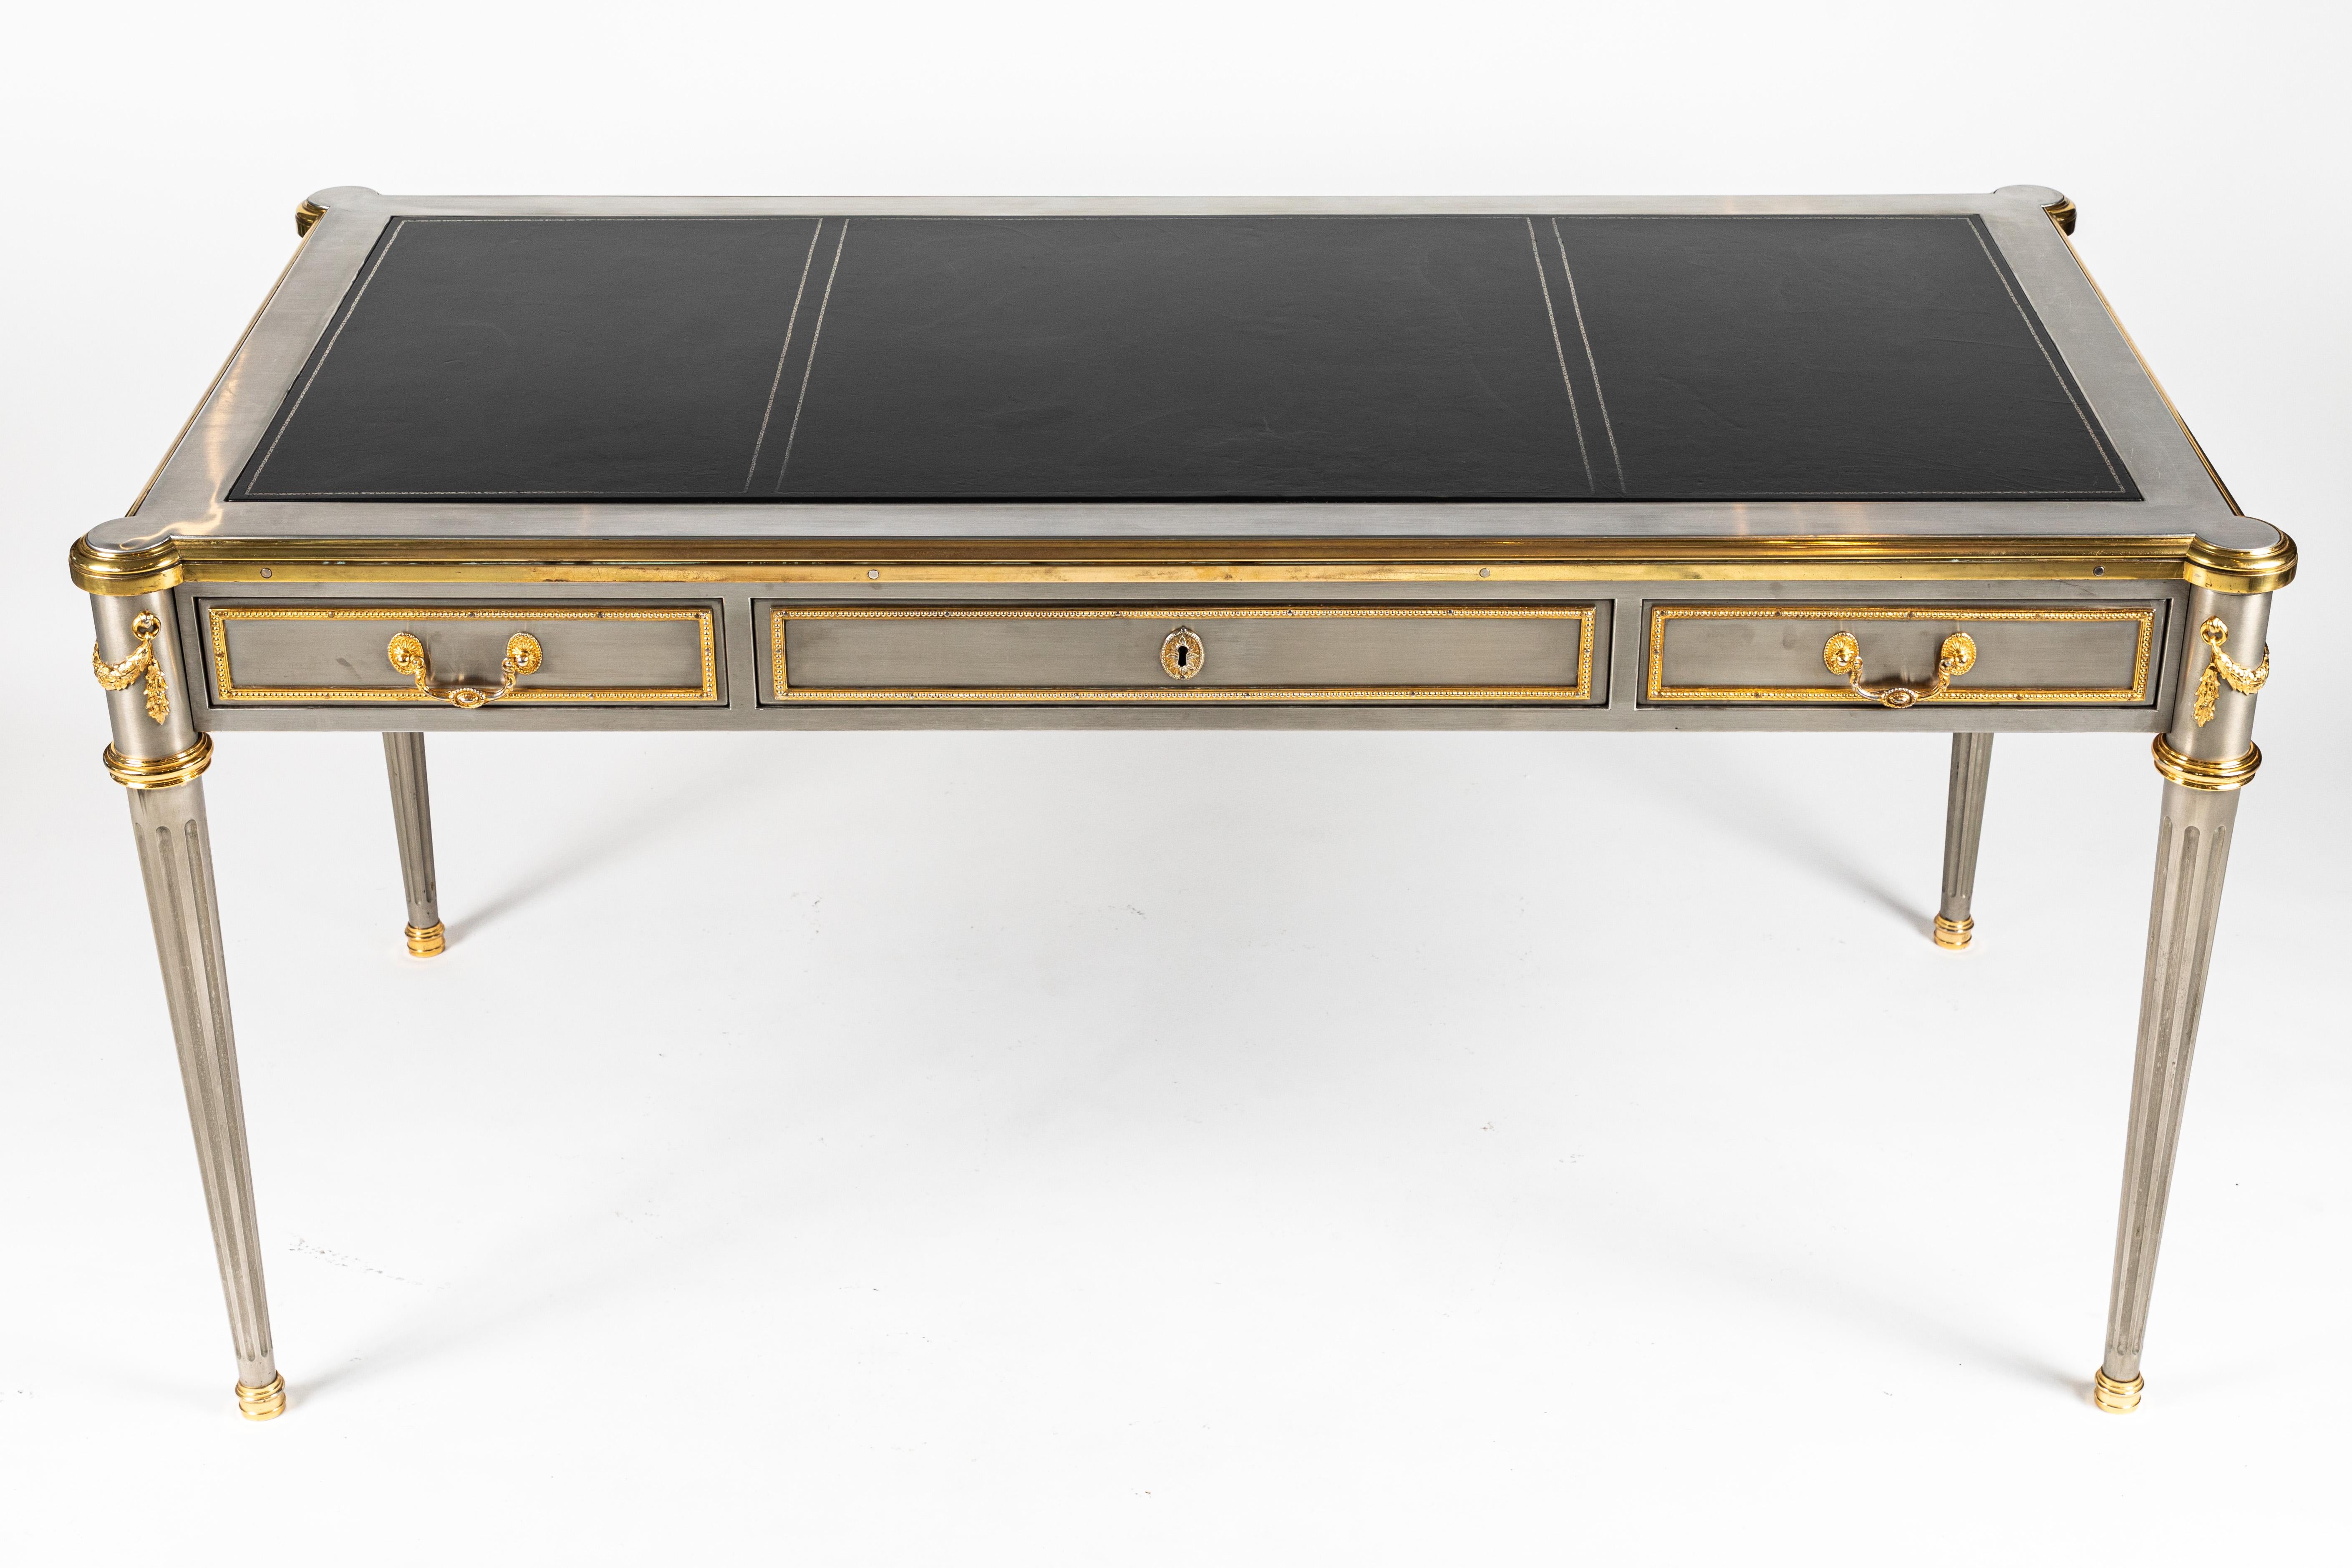 Steel and Bronze Dore Writing Desk with Leather Top by John Vesey 1